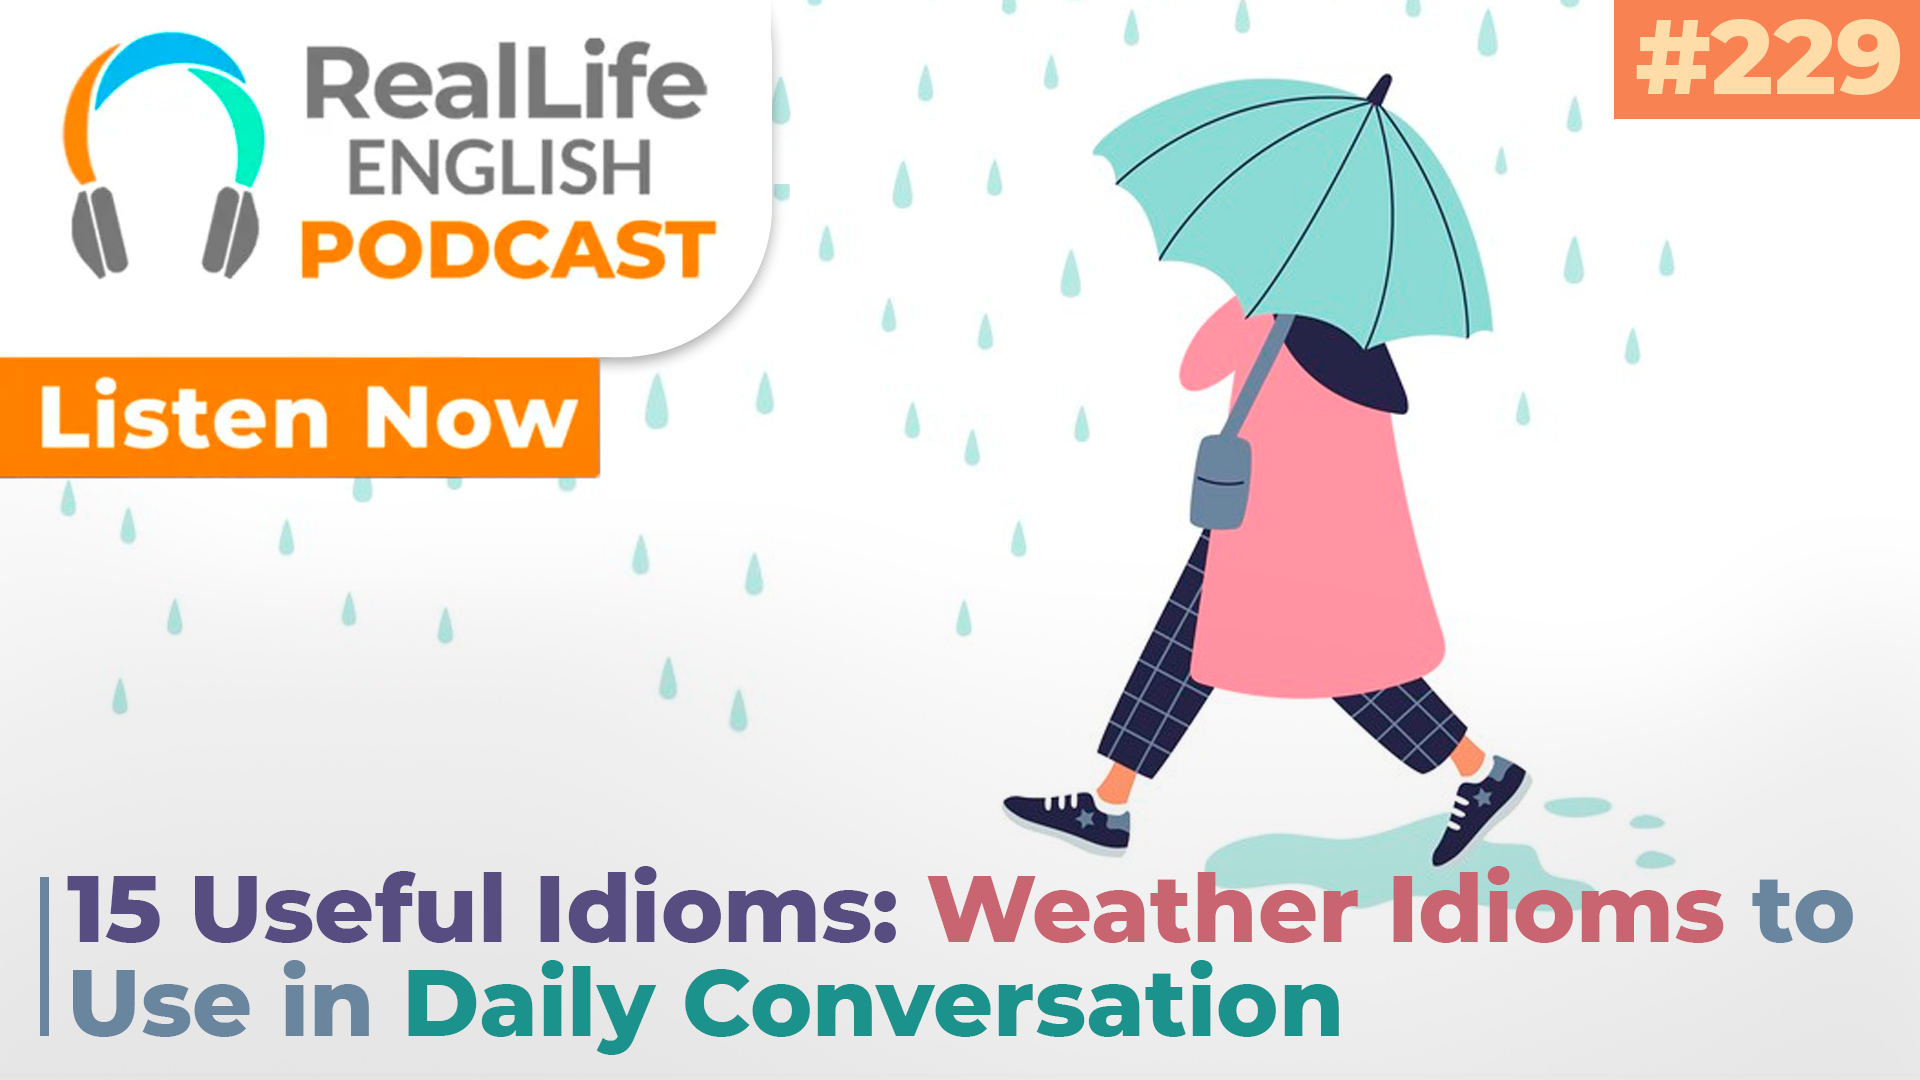 8 Common Idioms For Windy Weather - LillyPad.ai